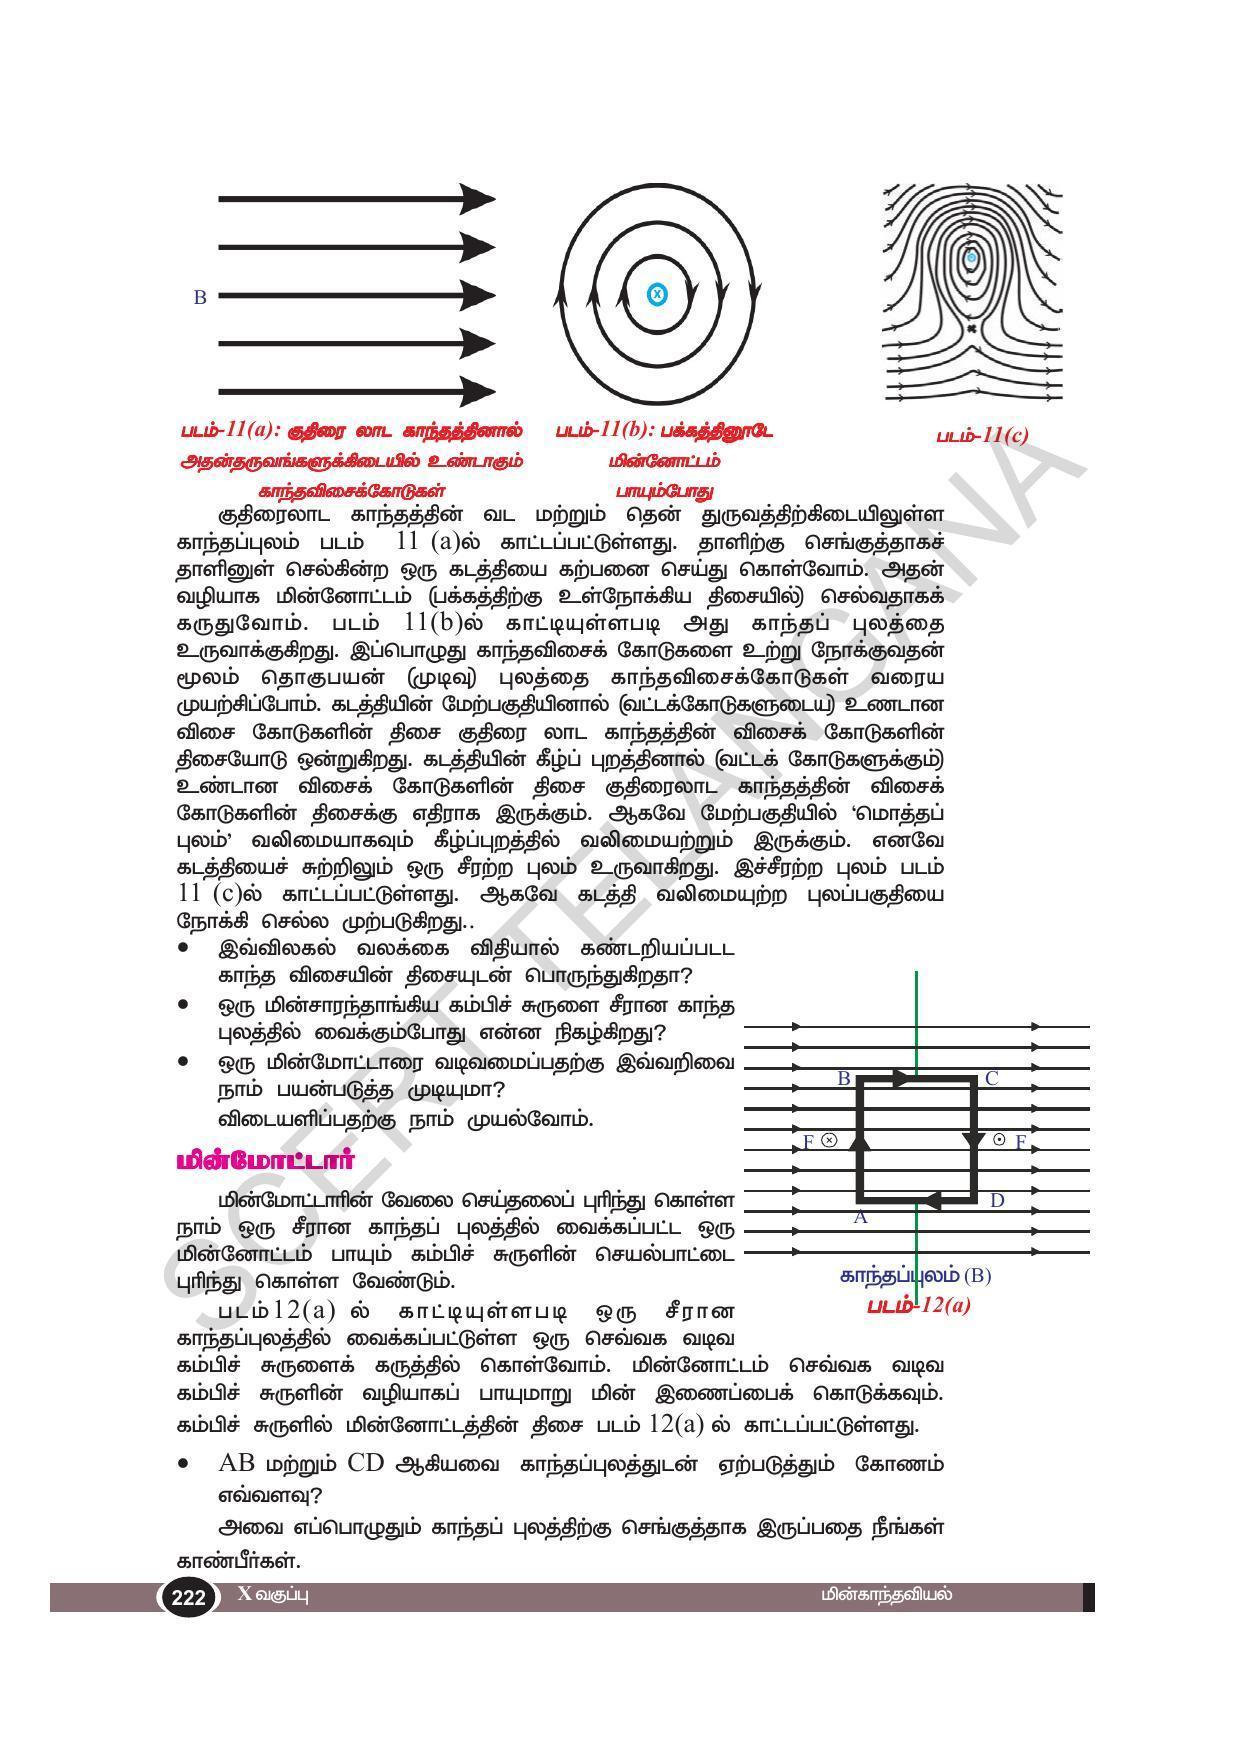 TS SCERT Class 10 Physical Science(Tamil Medium) Text Book - Page 234